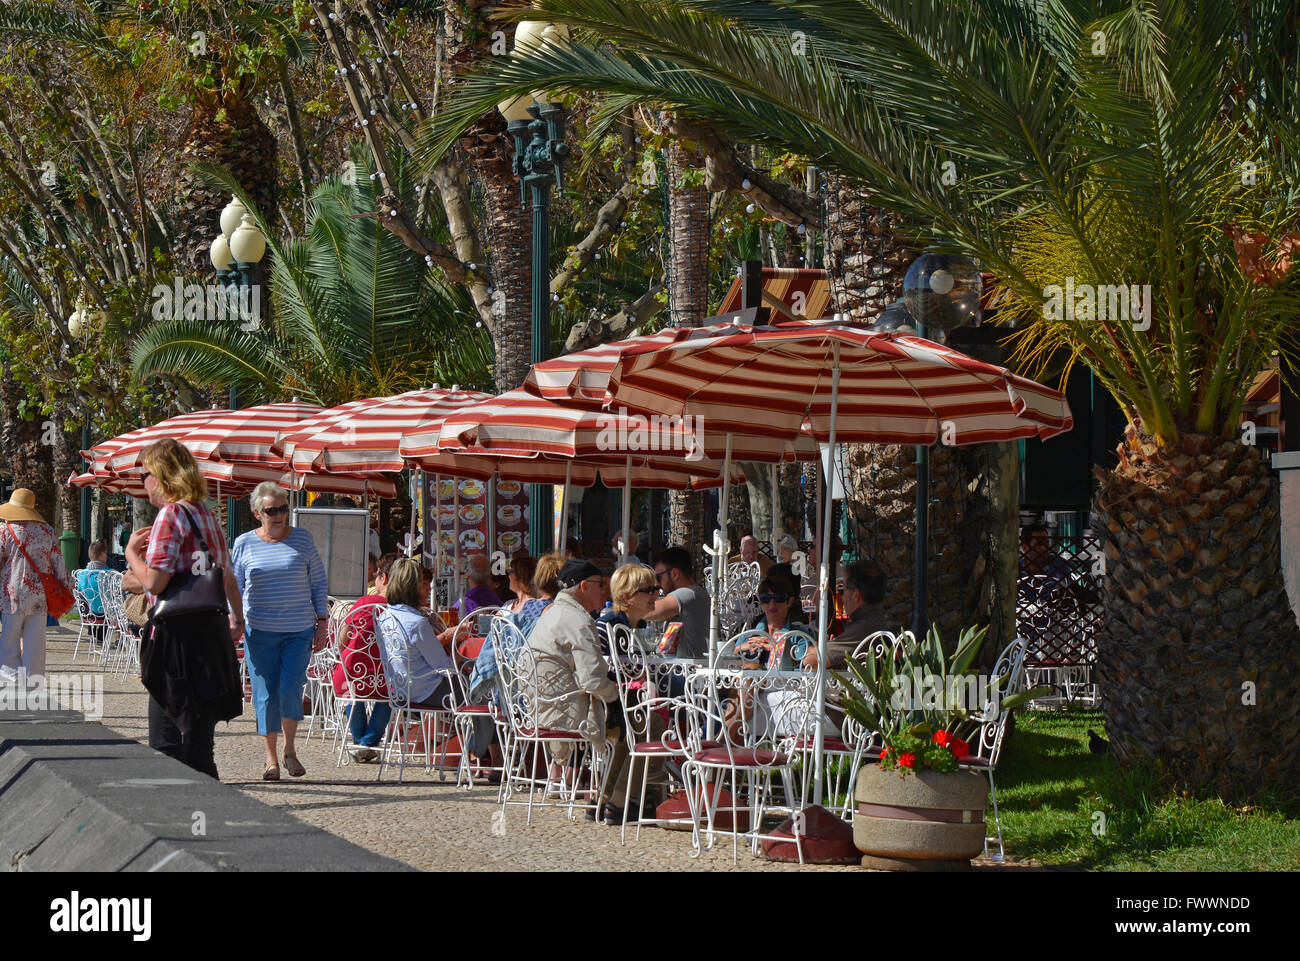 Cafe and restaurant with people sitting and strolling on seafront promenade in Funchal, Madeira, Portugal Stock Photo